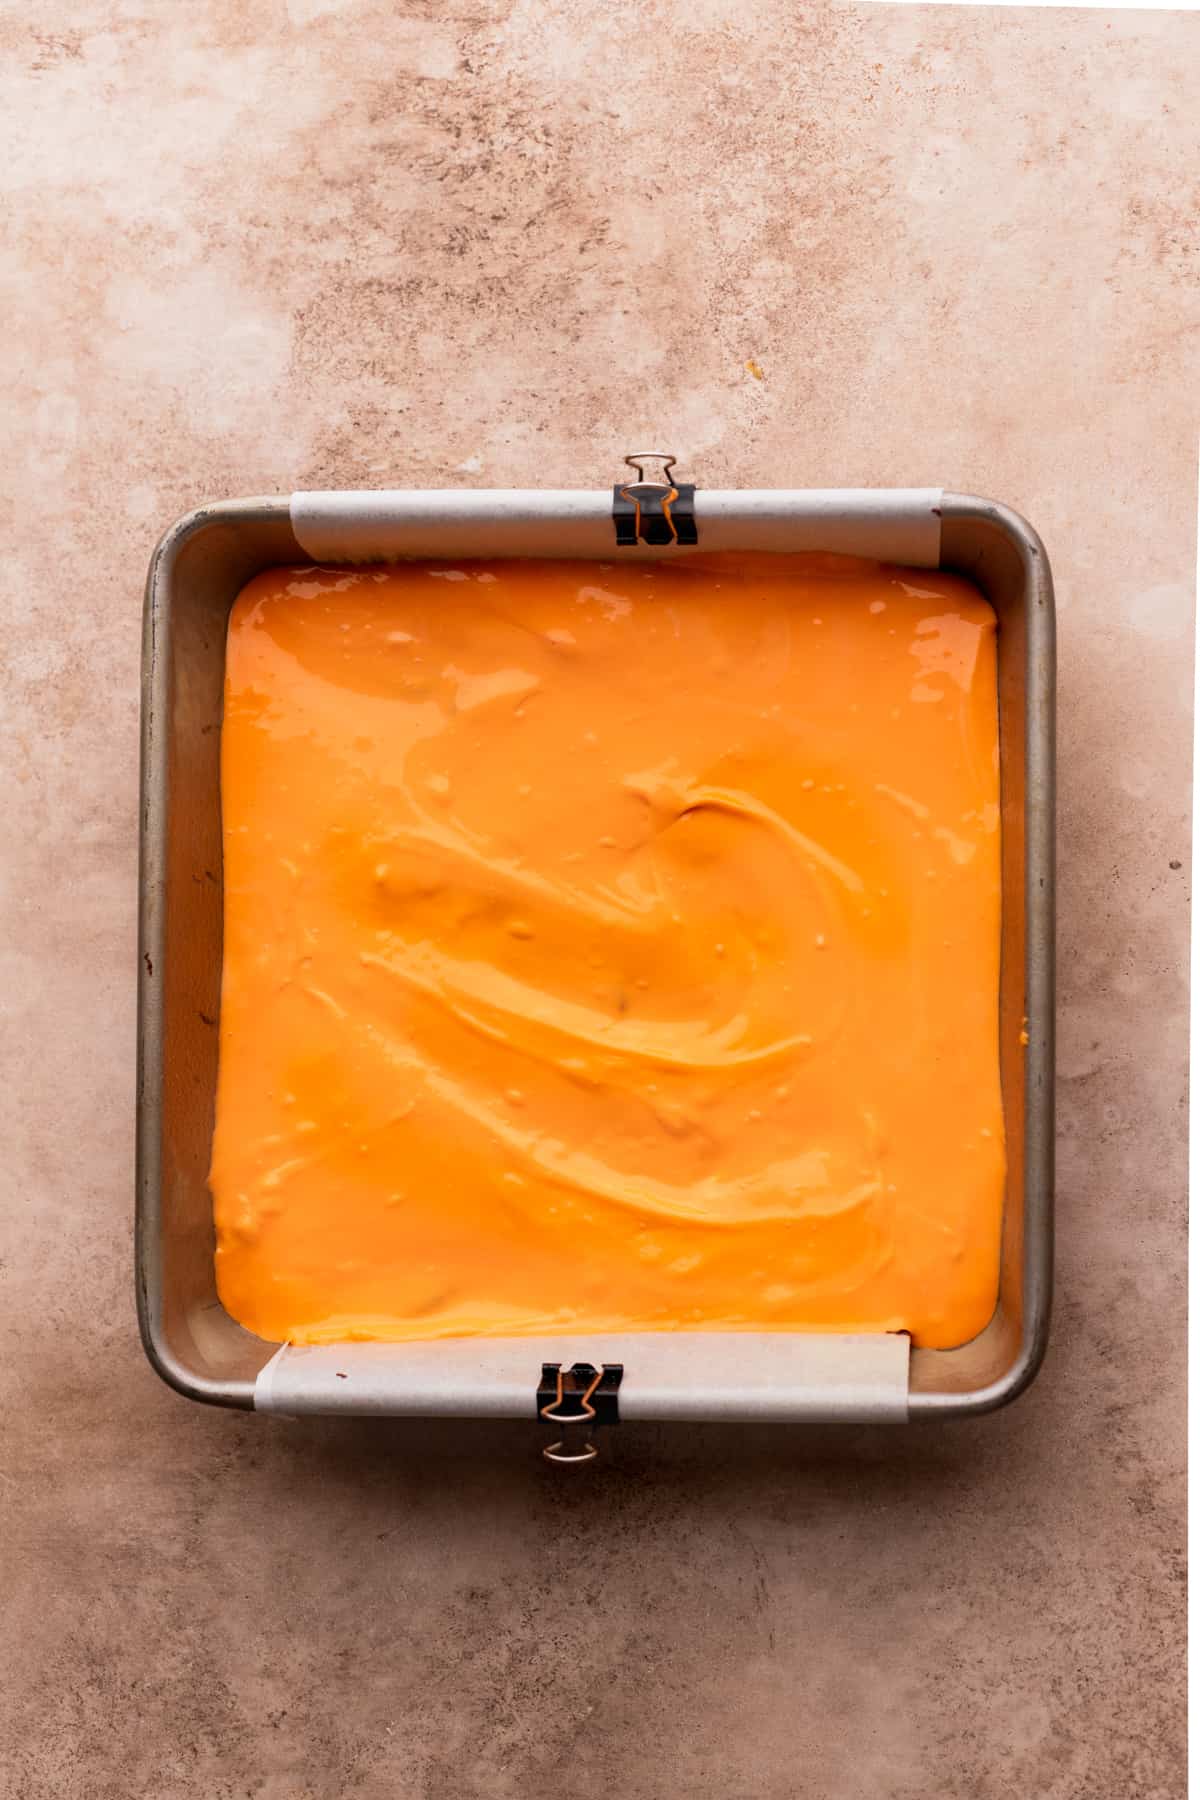 Orange cheesecake on top of the brownie batter.